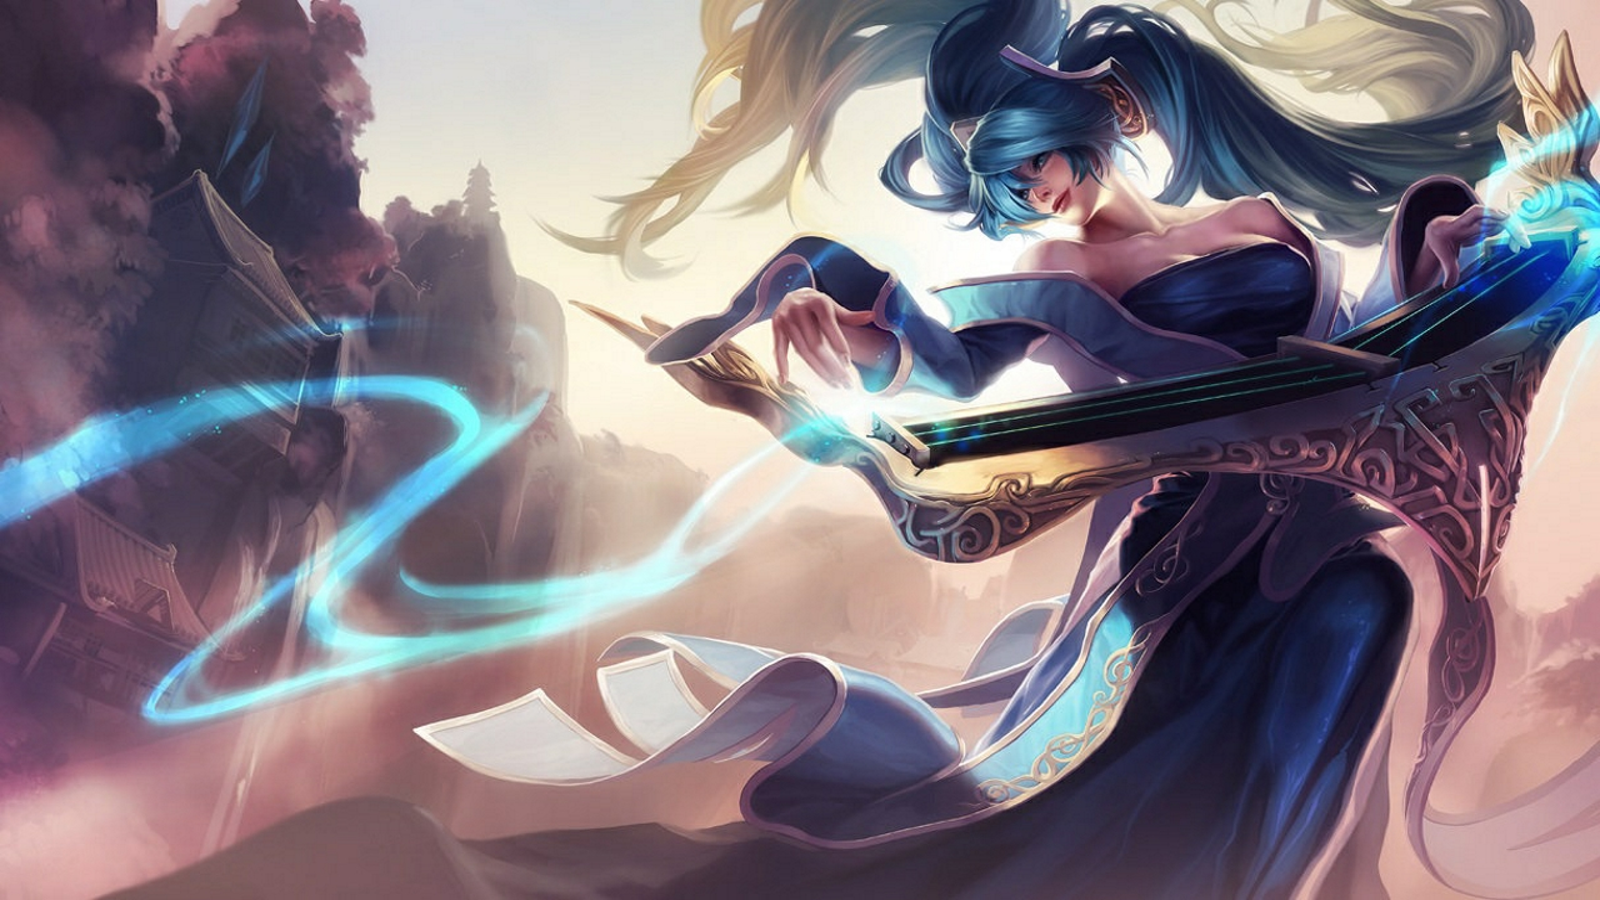 Choosing the Right Champion – League of Legends Support